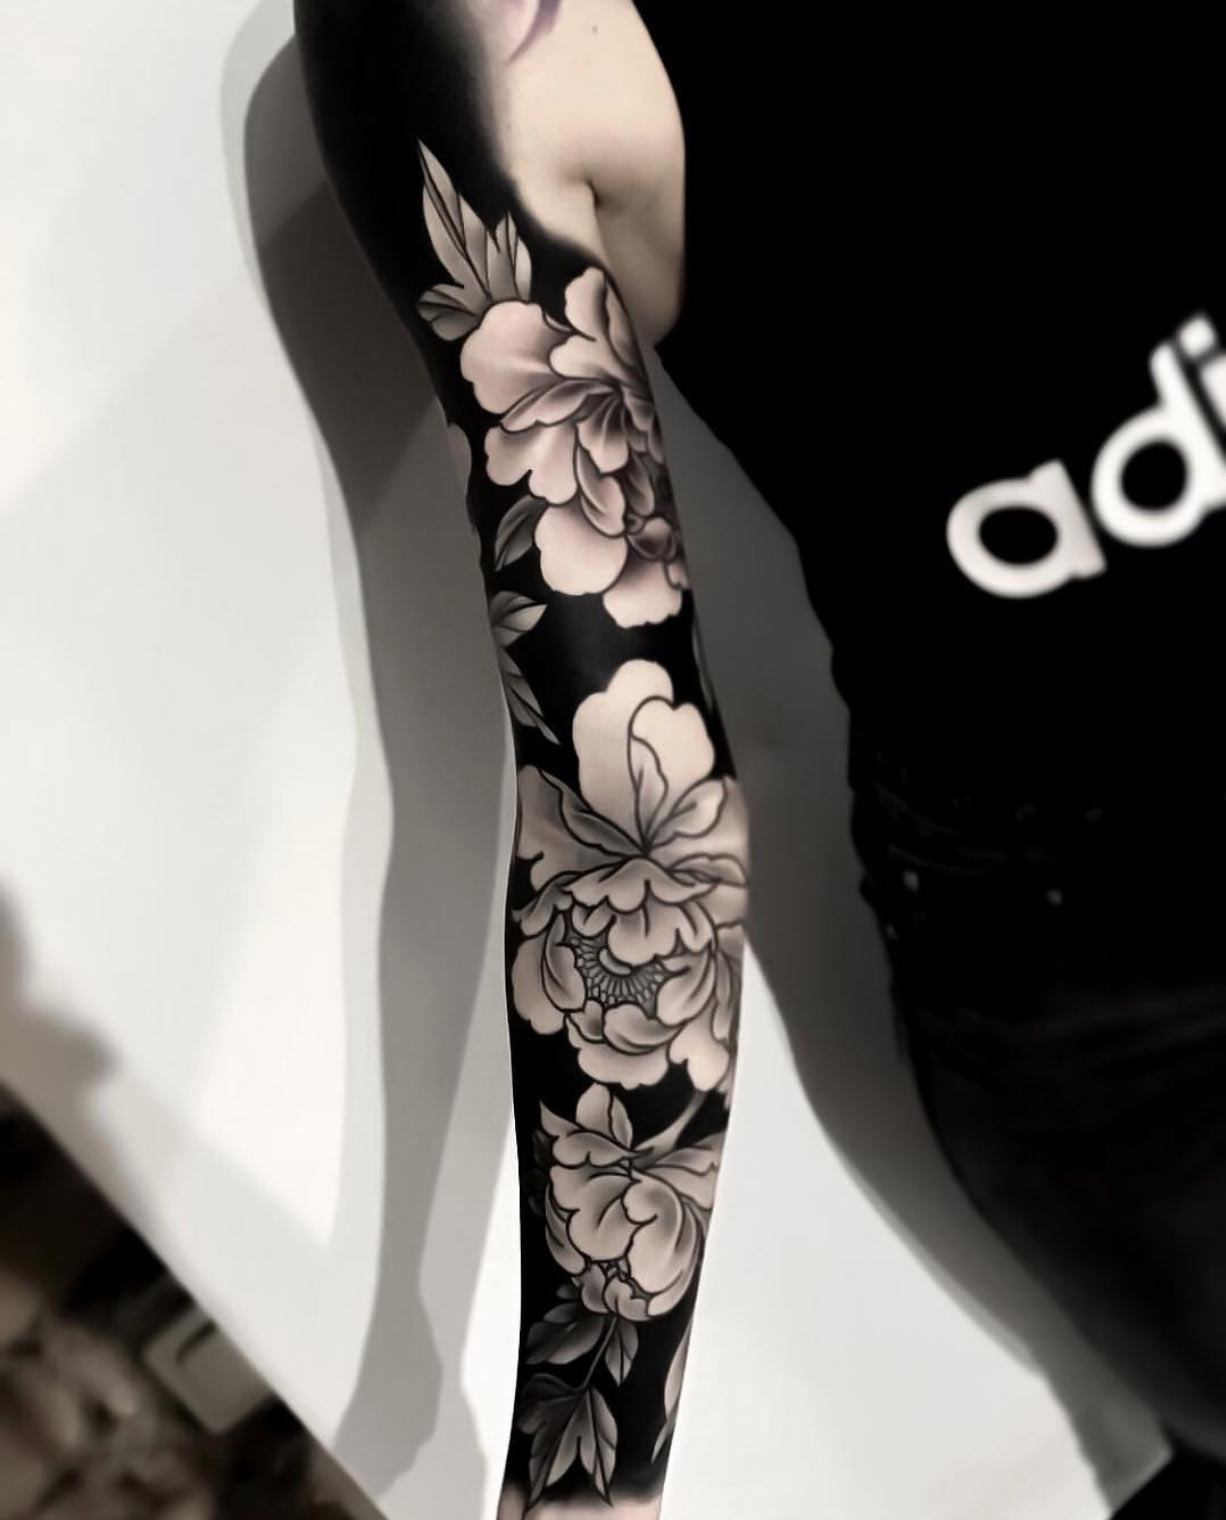 A floral sleeve by Emil Salmins